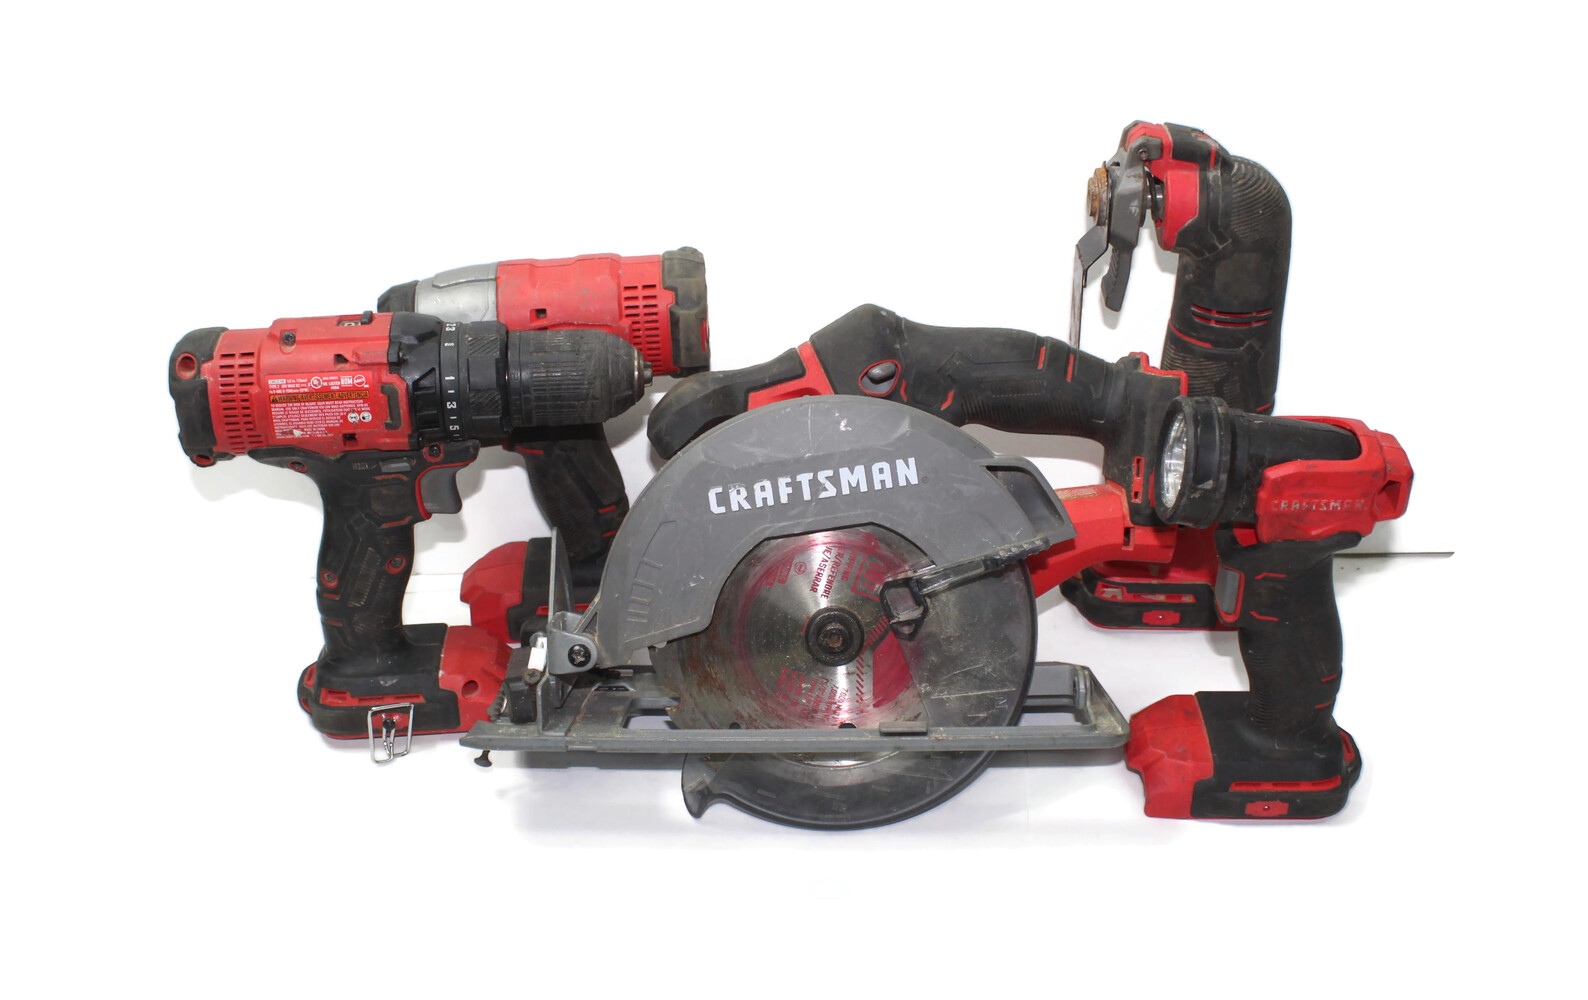 Craftsman  Combo Tool Kit with 2 Batteries and Charger